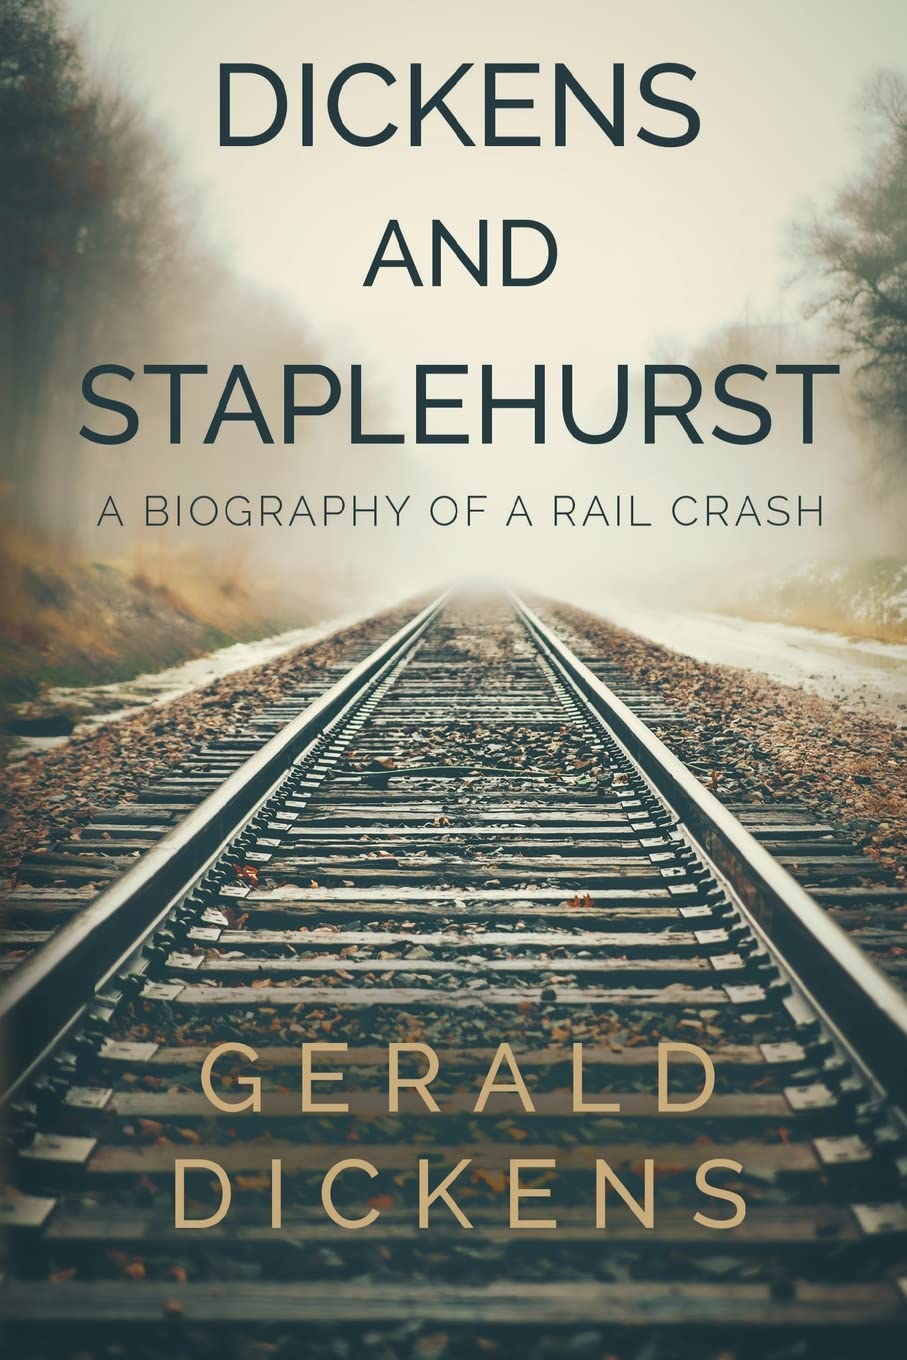 Book jacket for "Dickens and Staplehurst: A Biography of a Rail Crash" by Gerald Dickens